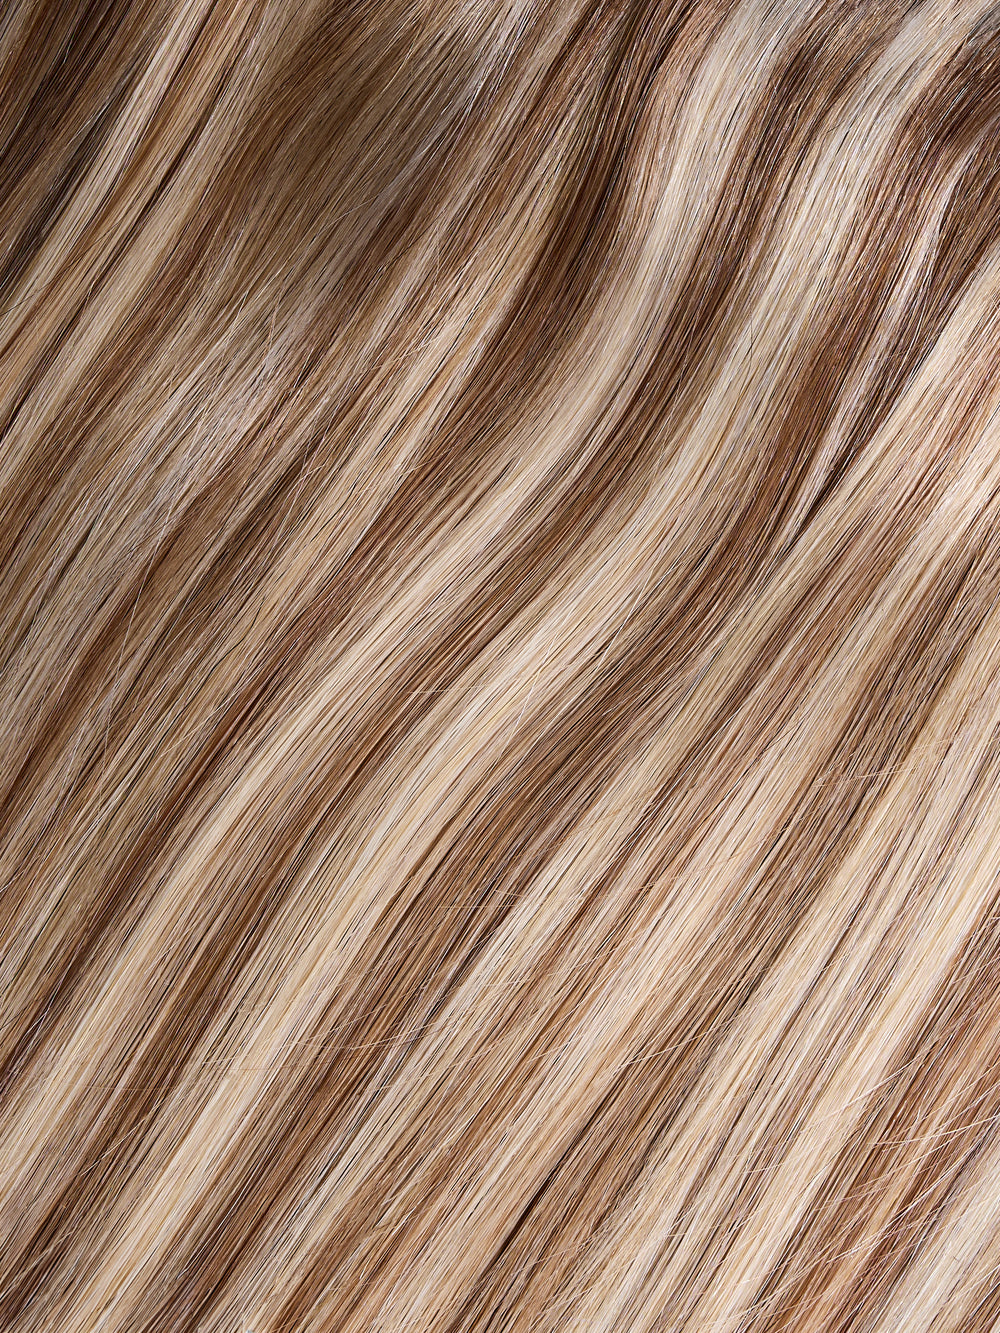 Blondette Clip-In Hair Extensions Shade